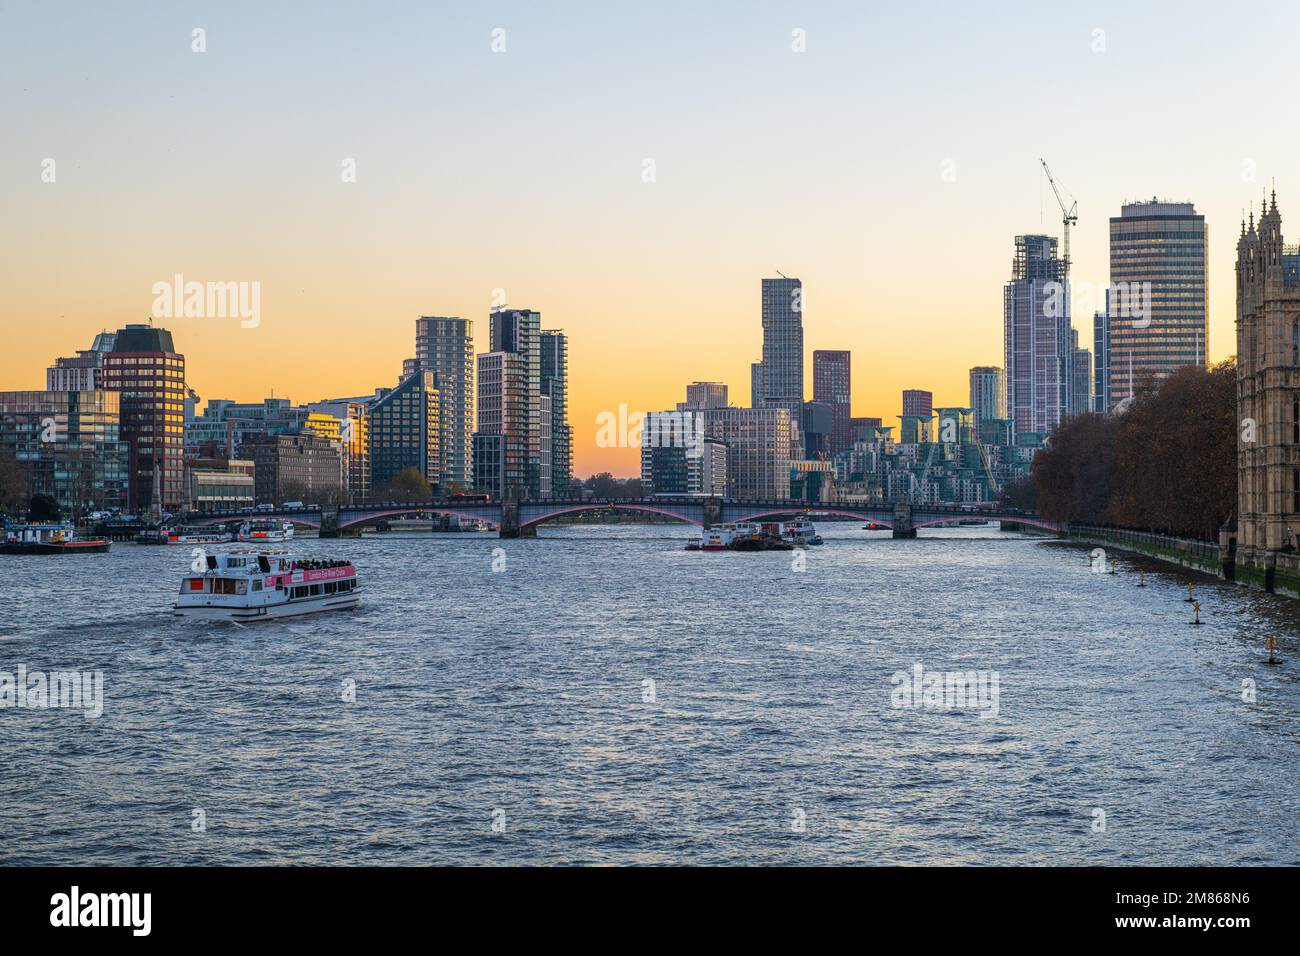 A beautiful view of the Tower Bridge over the Thames river at sunset in London, United Kingdom. Stock Photo